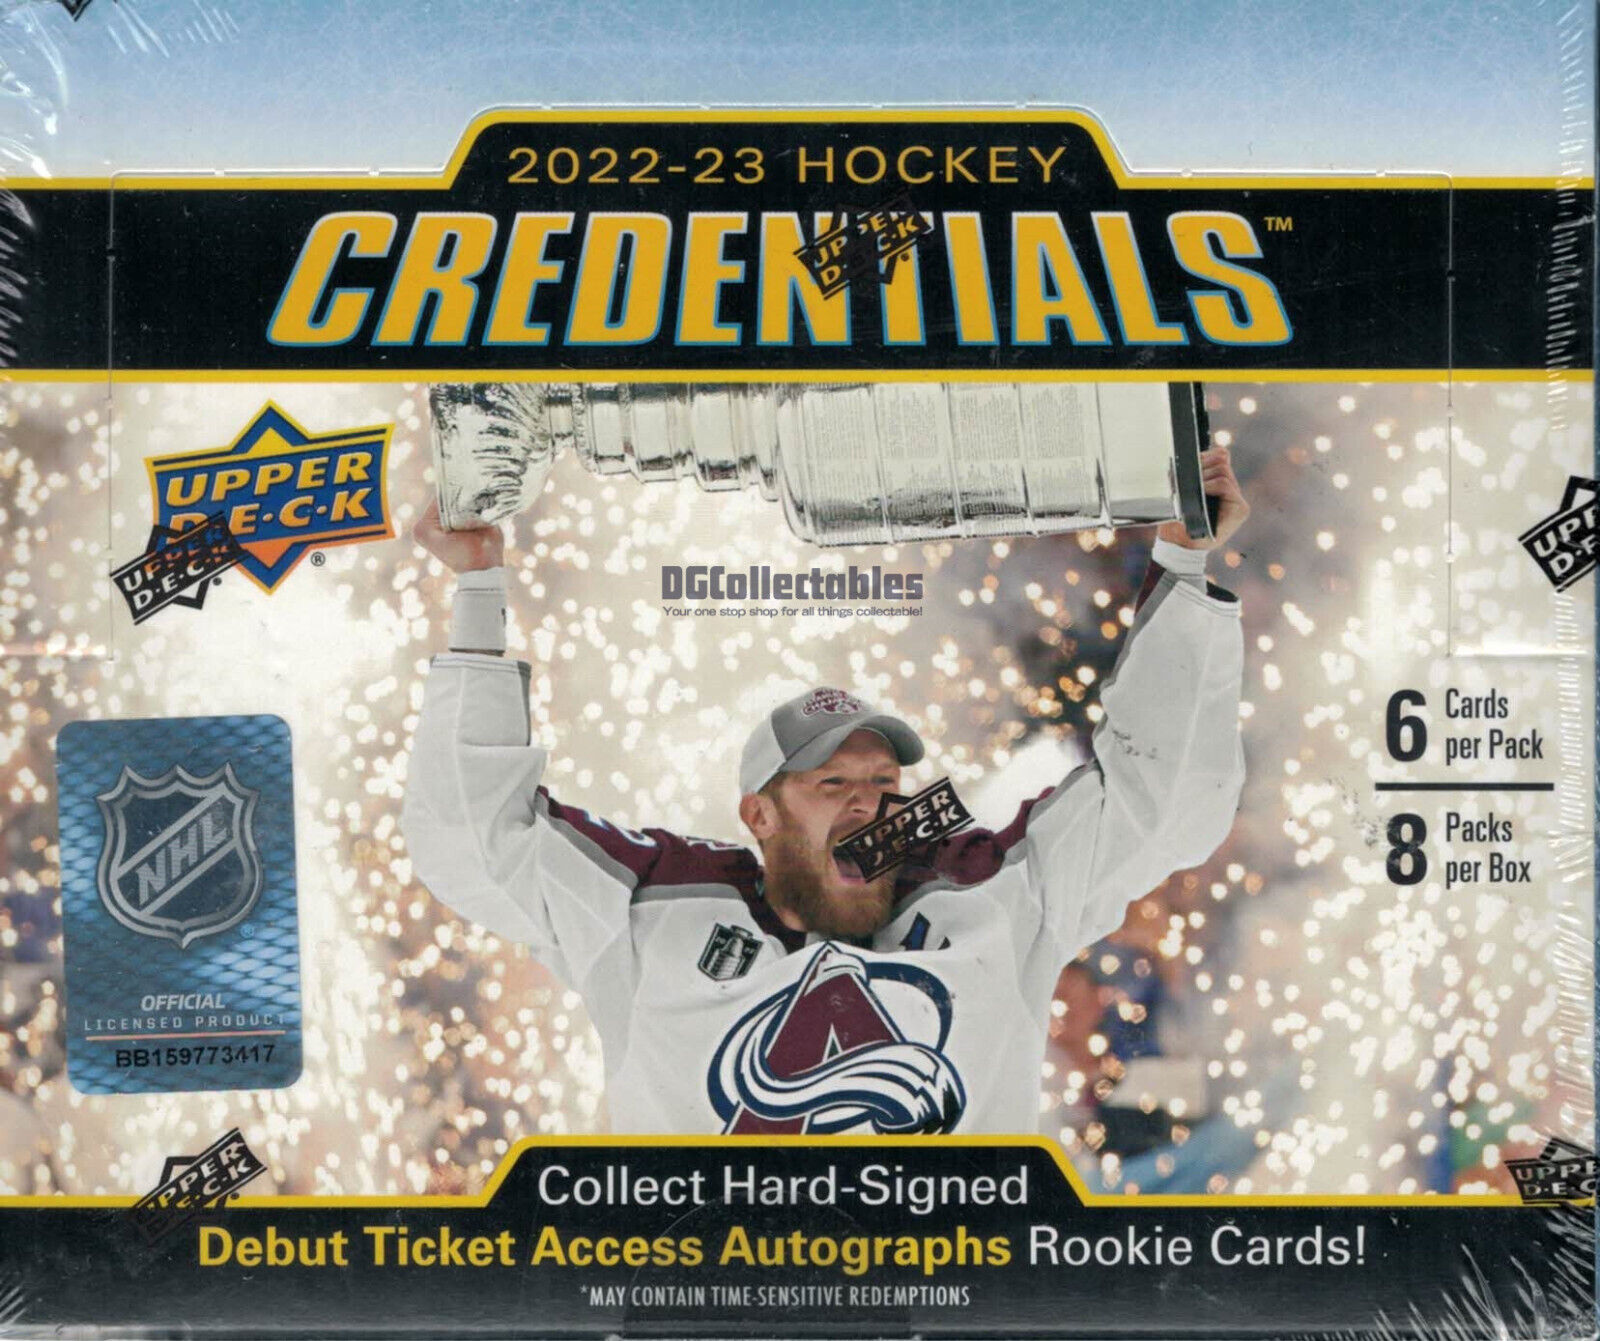 2022-23 UPPER DECK CREDENTIALS NHL ICE HOCKEY FACTORY SEALED HOBBY BOX BRAND NEW